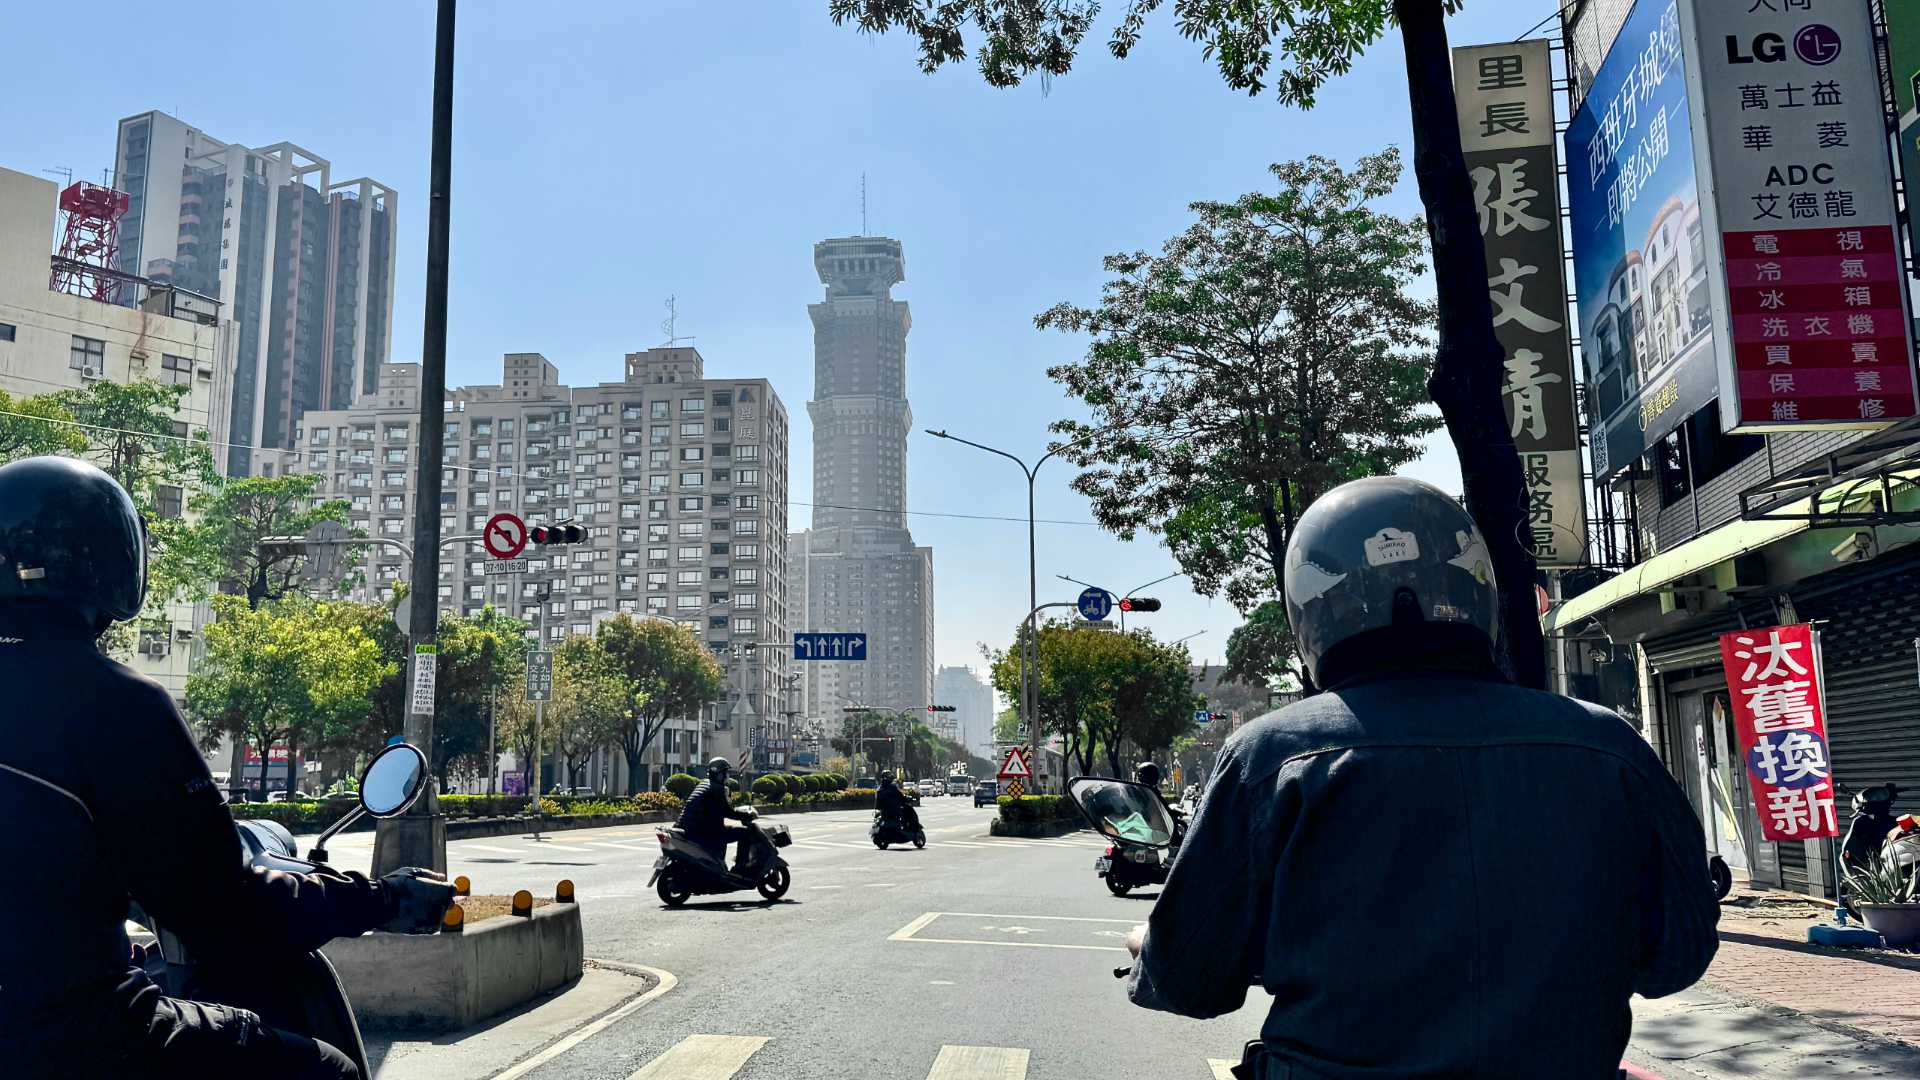 A point-of-view shot of Chang-Gu World Trade Center in Kaohsiung, Taiwan, taken while on a motorcycle at a red traffic light.